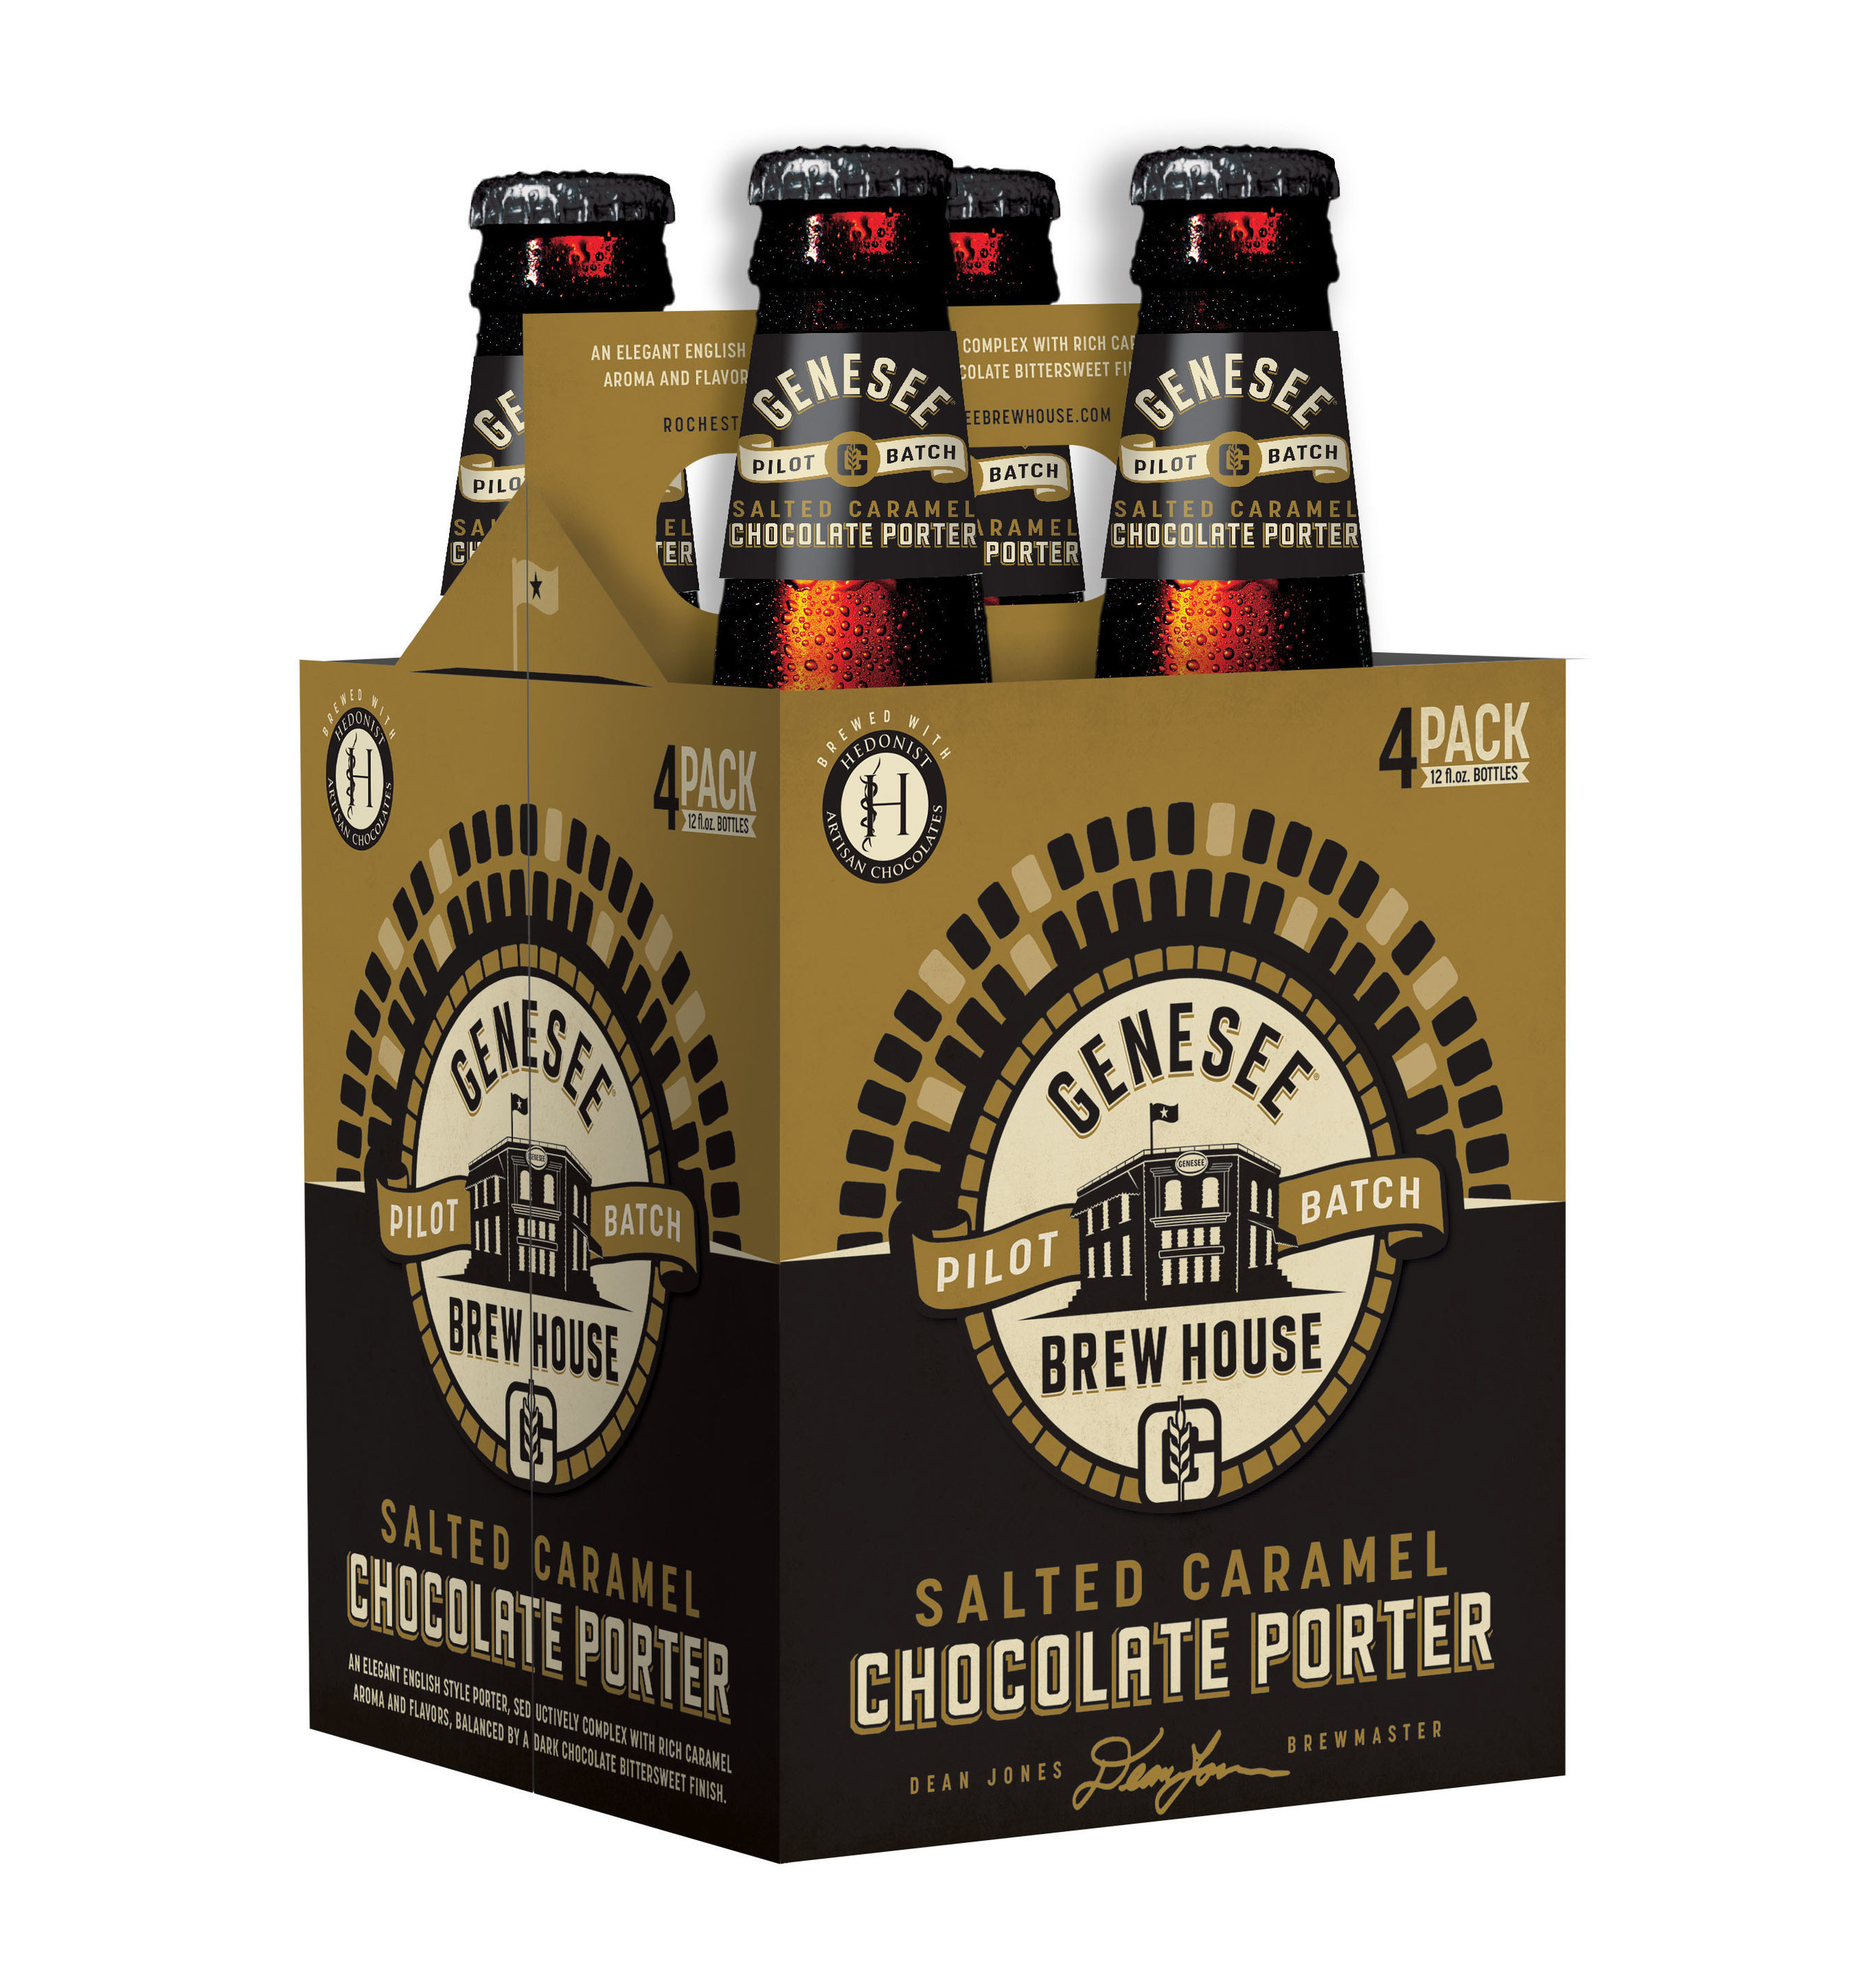 Genesee Brew House Pilot Batch Salted Caramel Chocolate Porter will be available in four-pack bottles just in time for the holiday season.